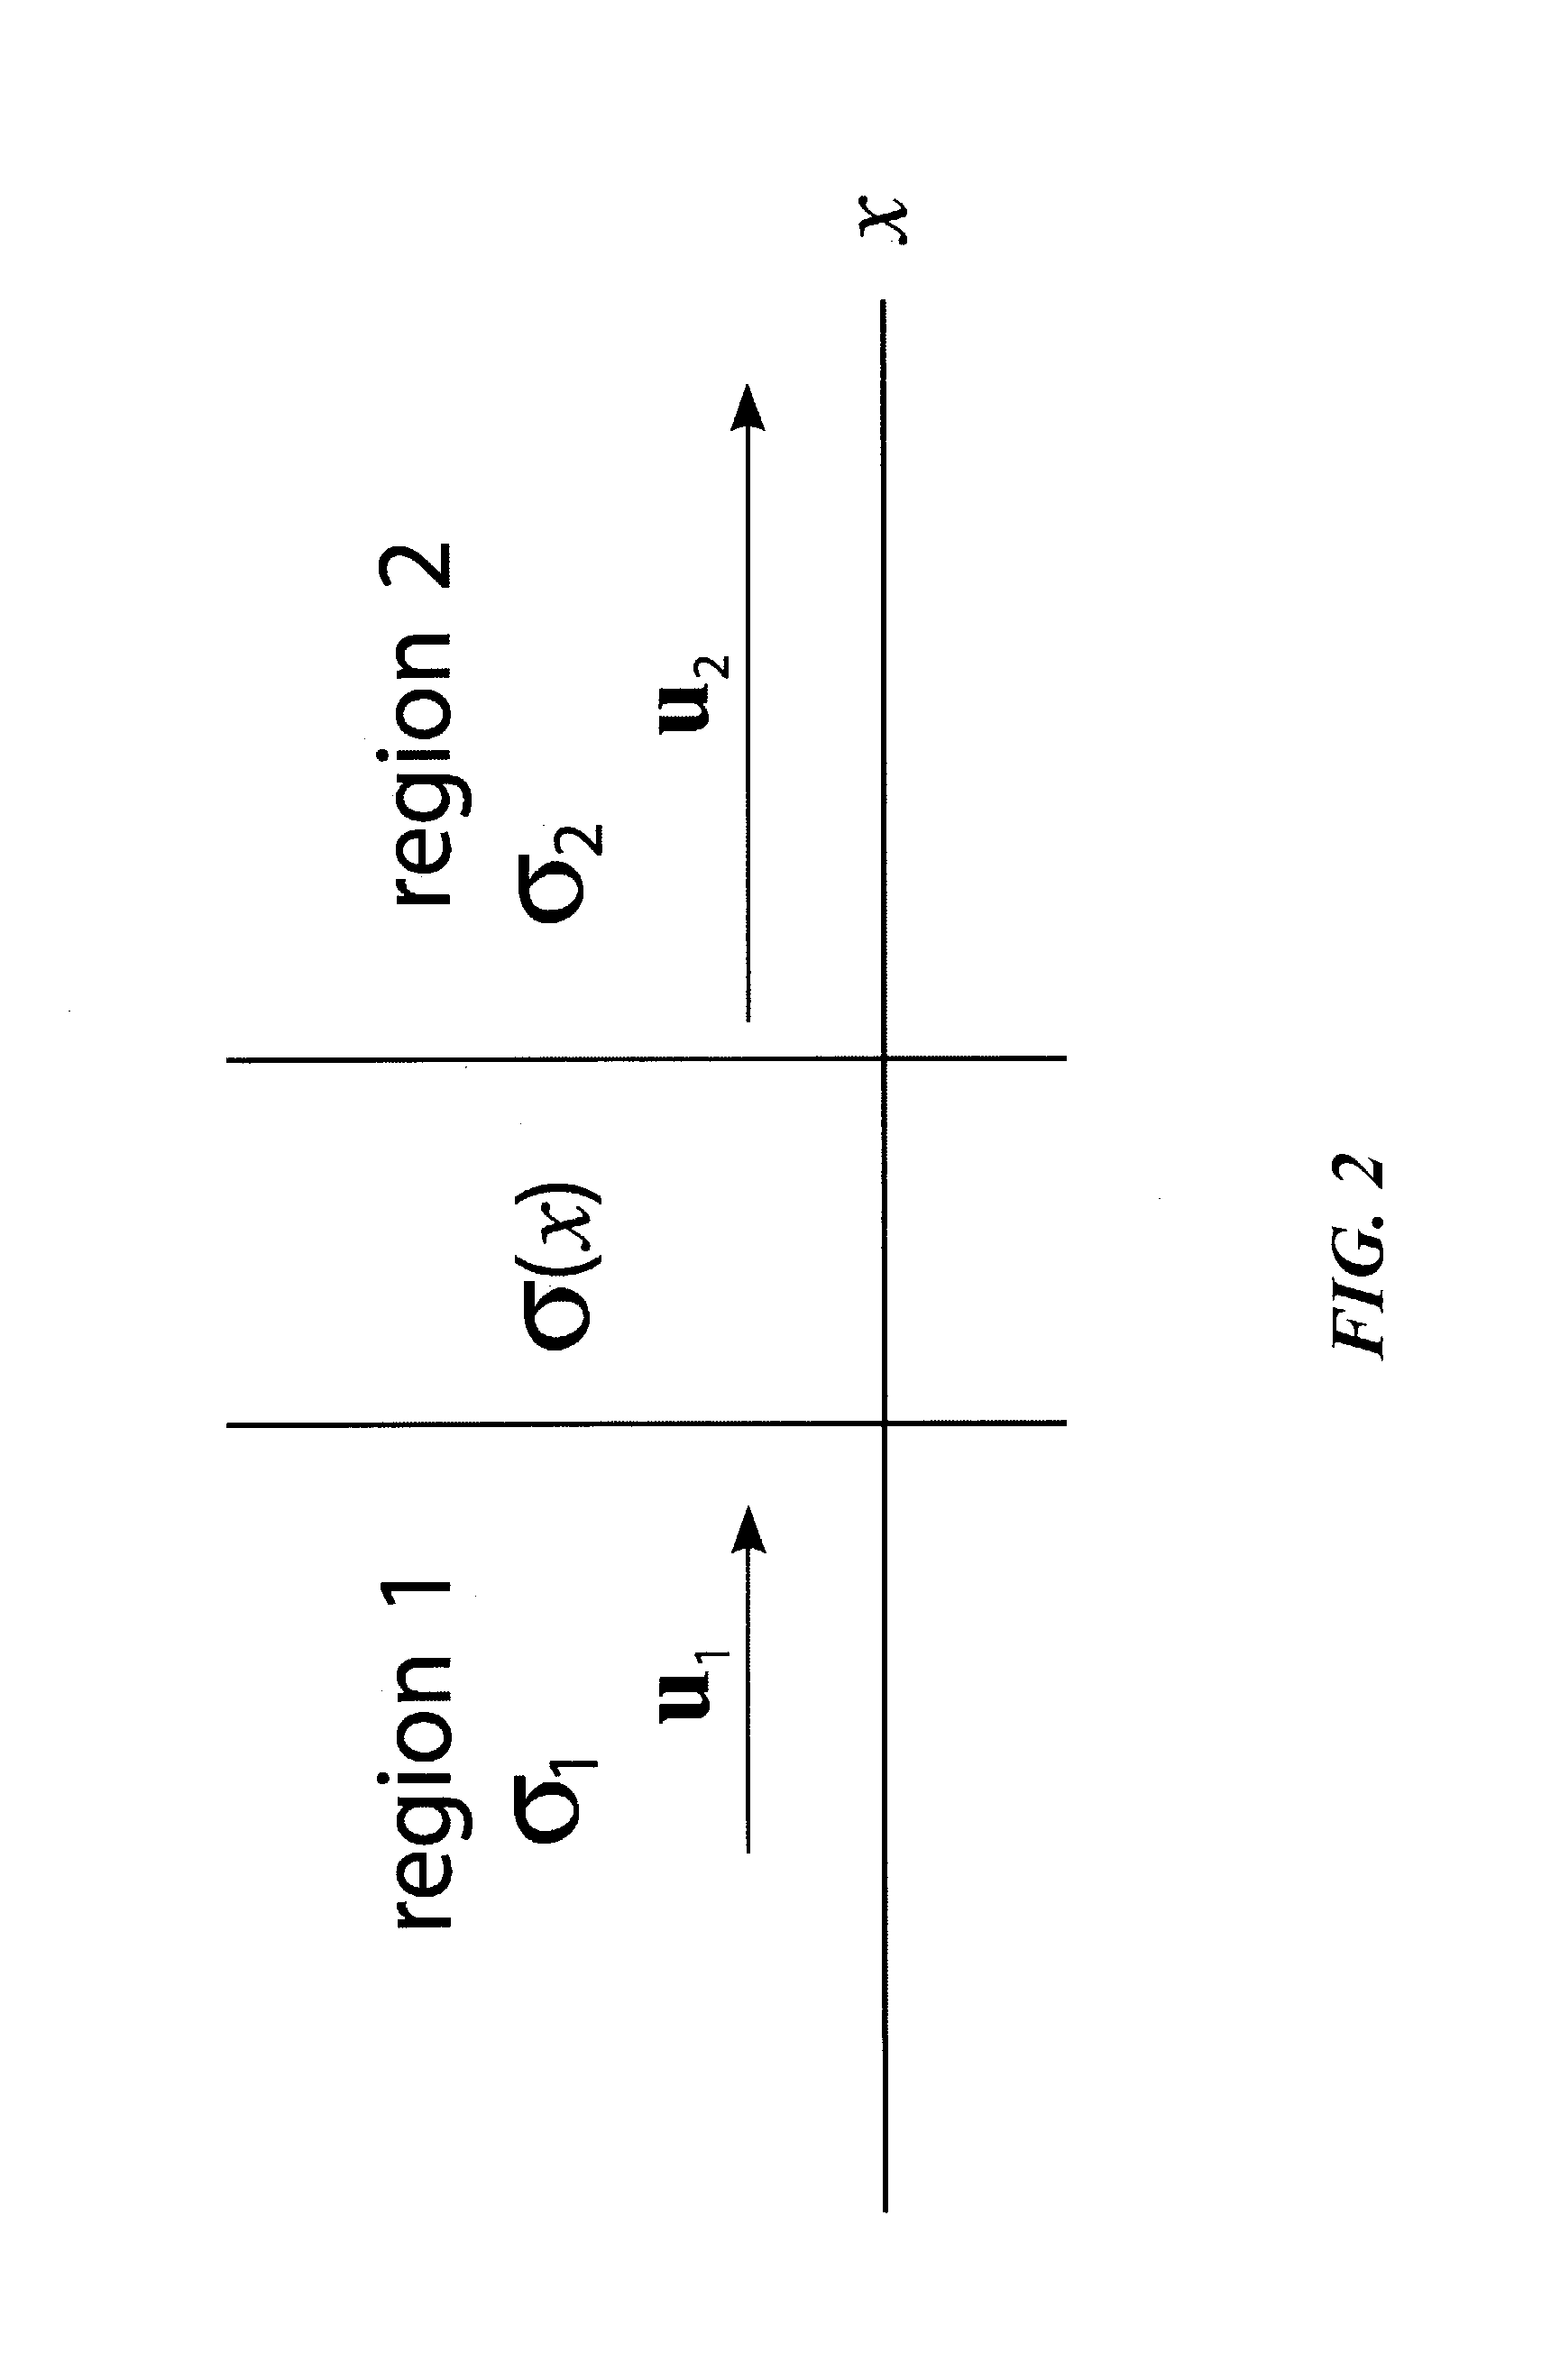 Piecewise uniform conduction-like flow channels and method therefor